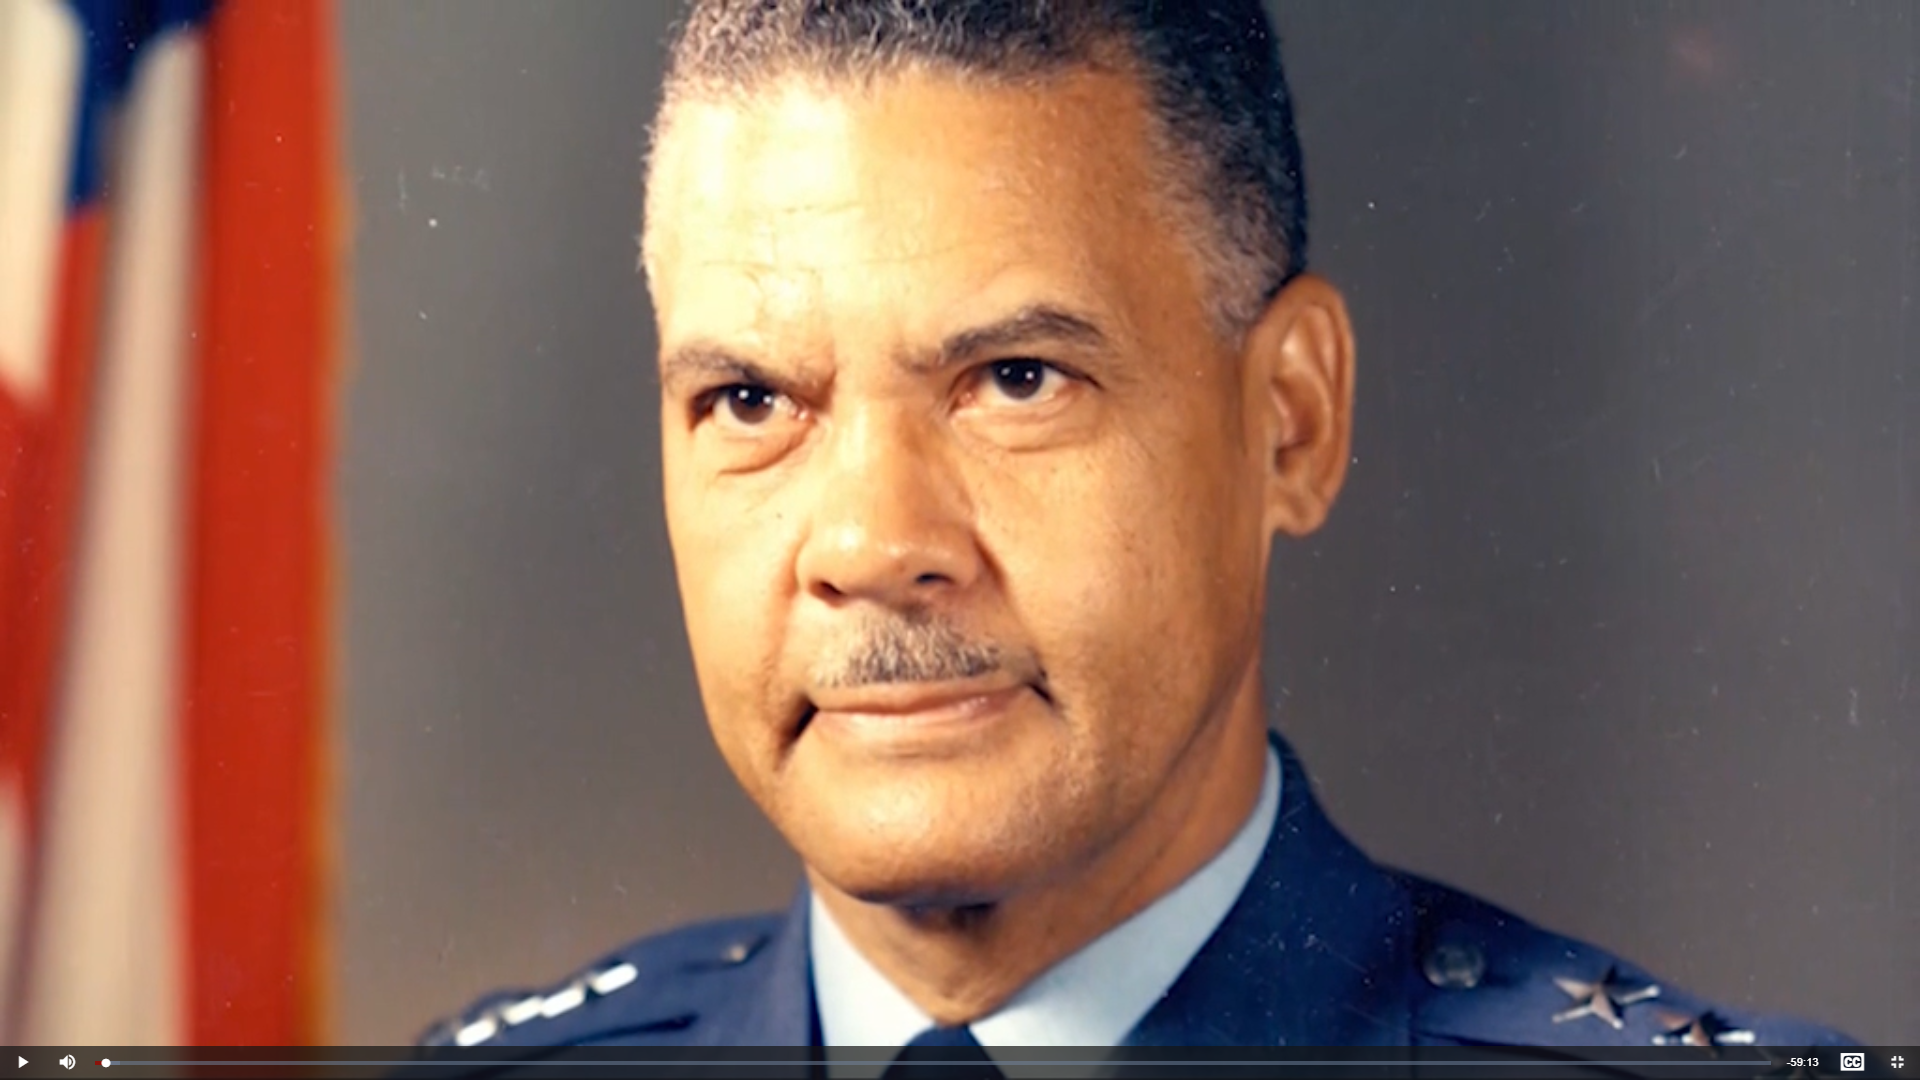 U.S. Air Force Academy Airfield Naming Ceremony in Honor of Gen. Davis